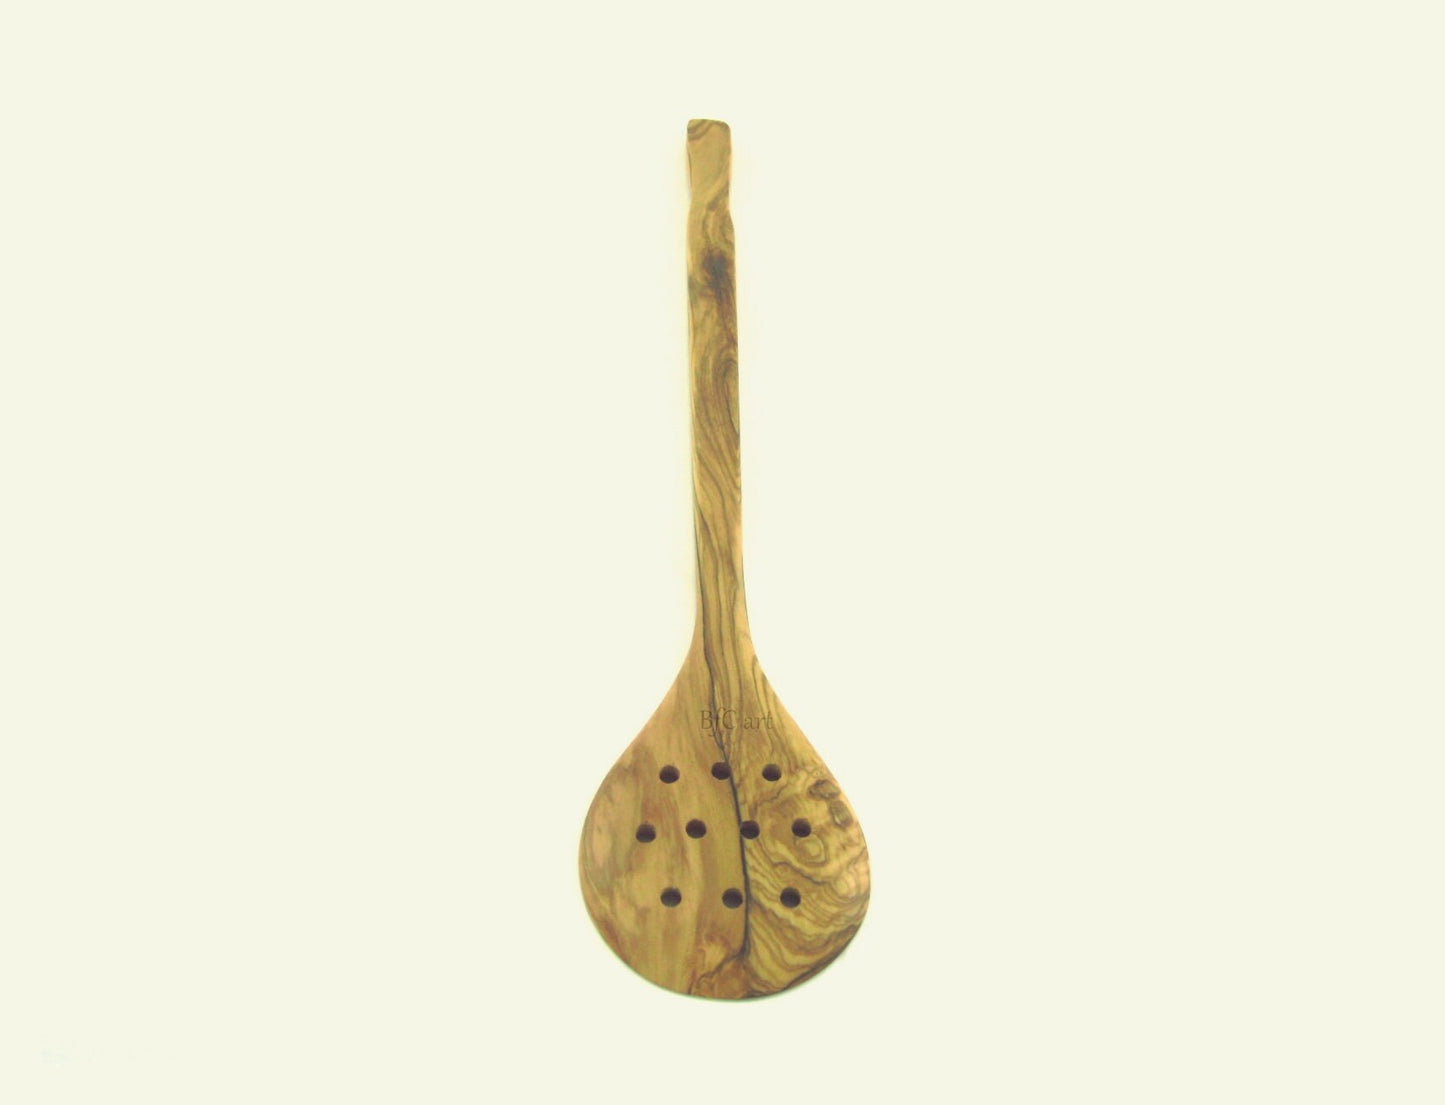 Wooden Spatula, Spoon With Holes, Spatula Olive Wood, Food Picker, Meat Shovel, Spatula For Paella, Rustic Spoon, Rustic Wooden Spoon